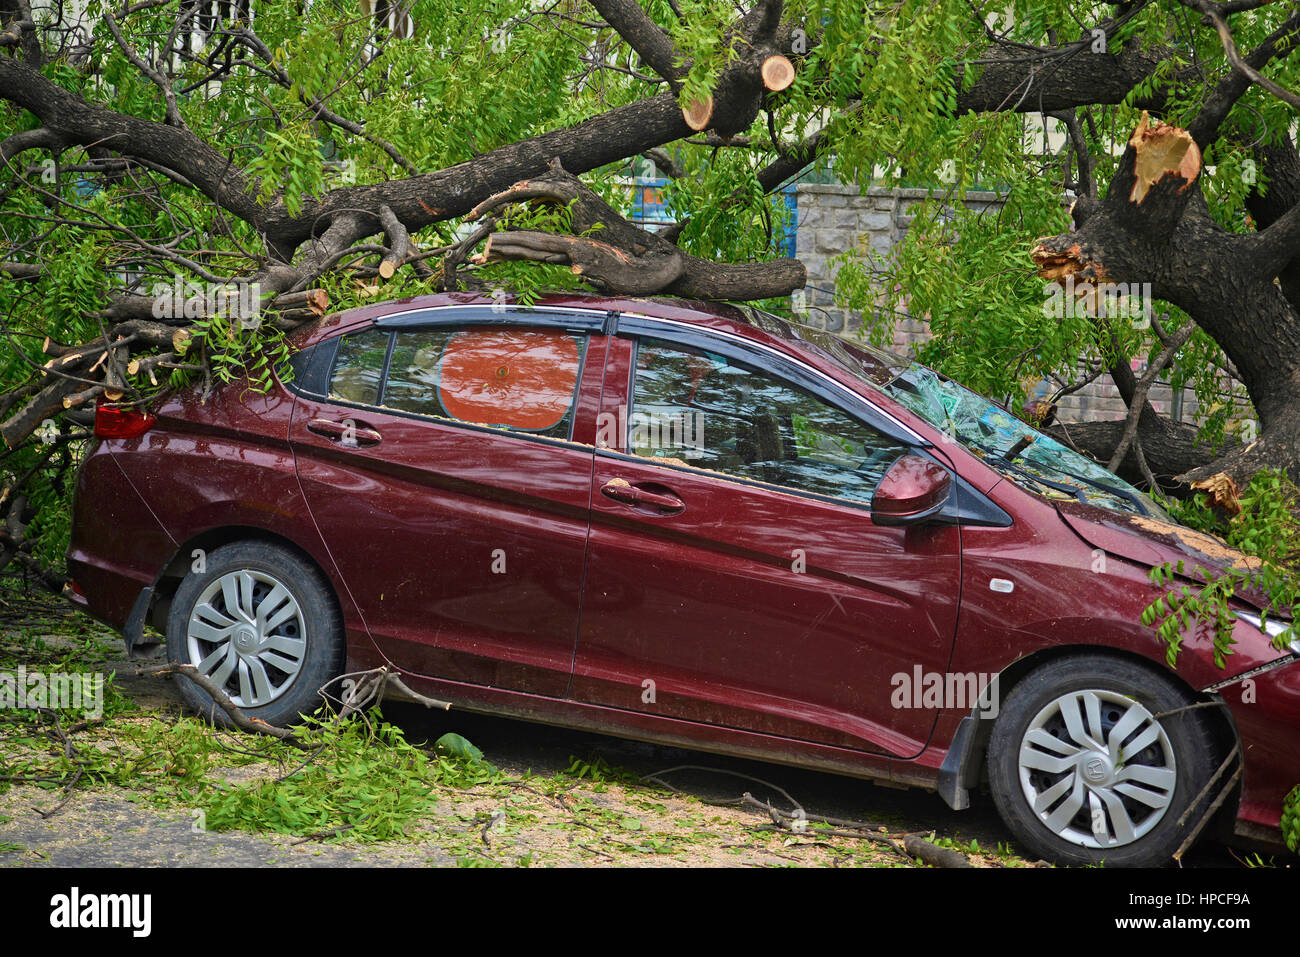 Car destroyed by a fallen tree Stock Photo